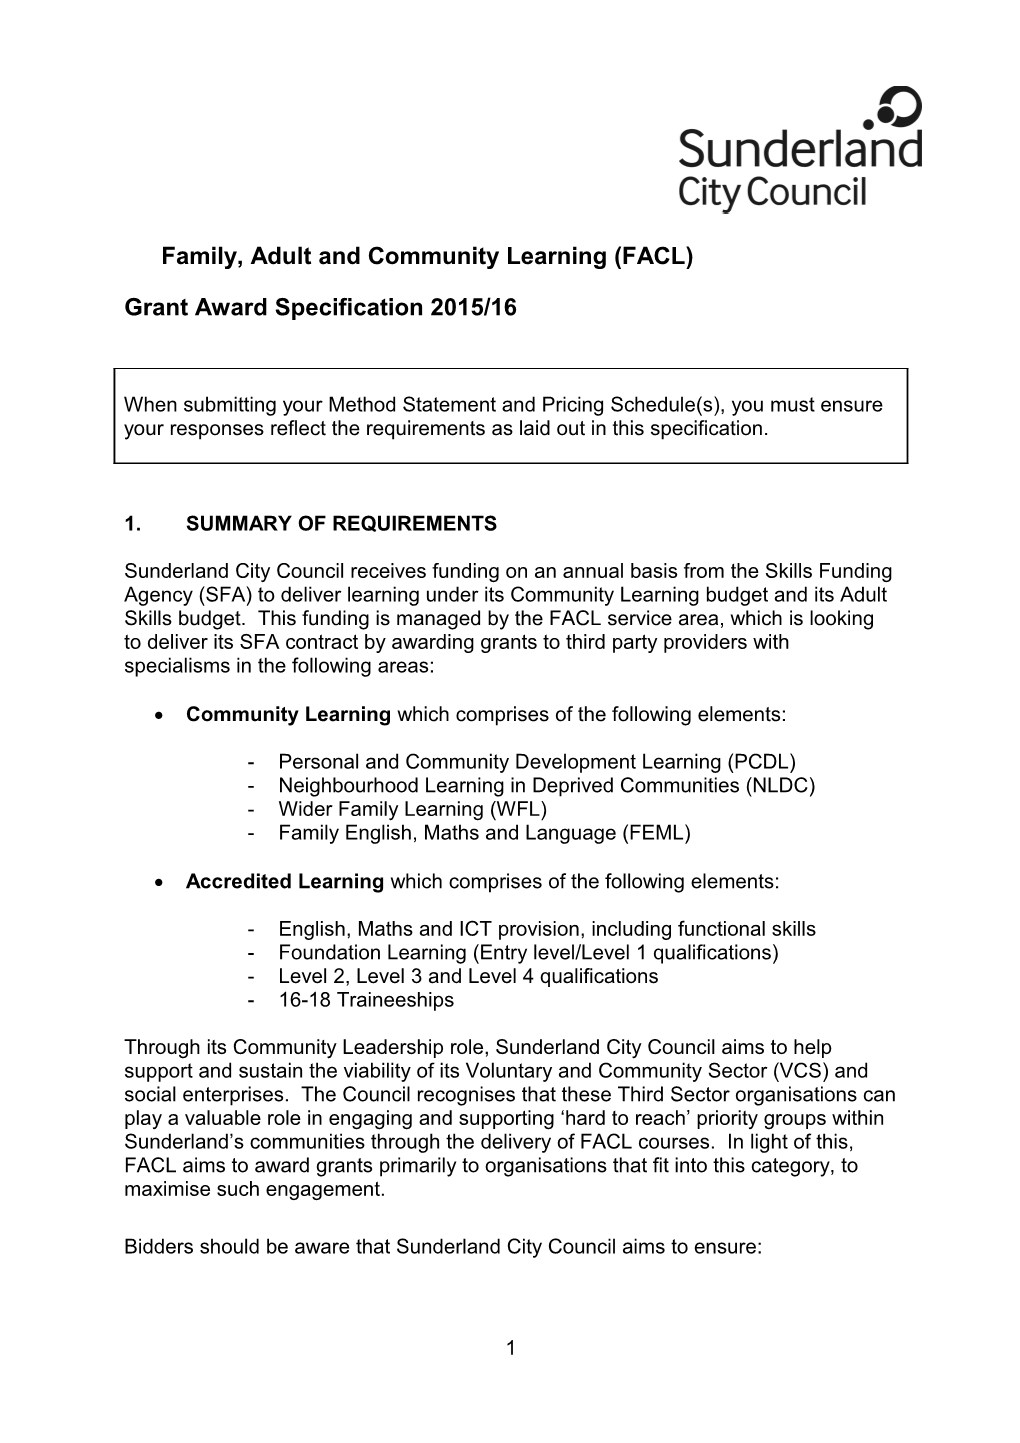 Family, Adult and Community Learning (FACL)